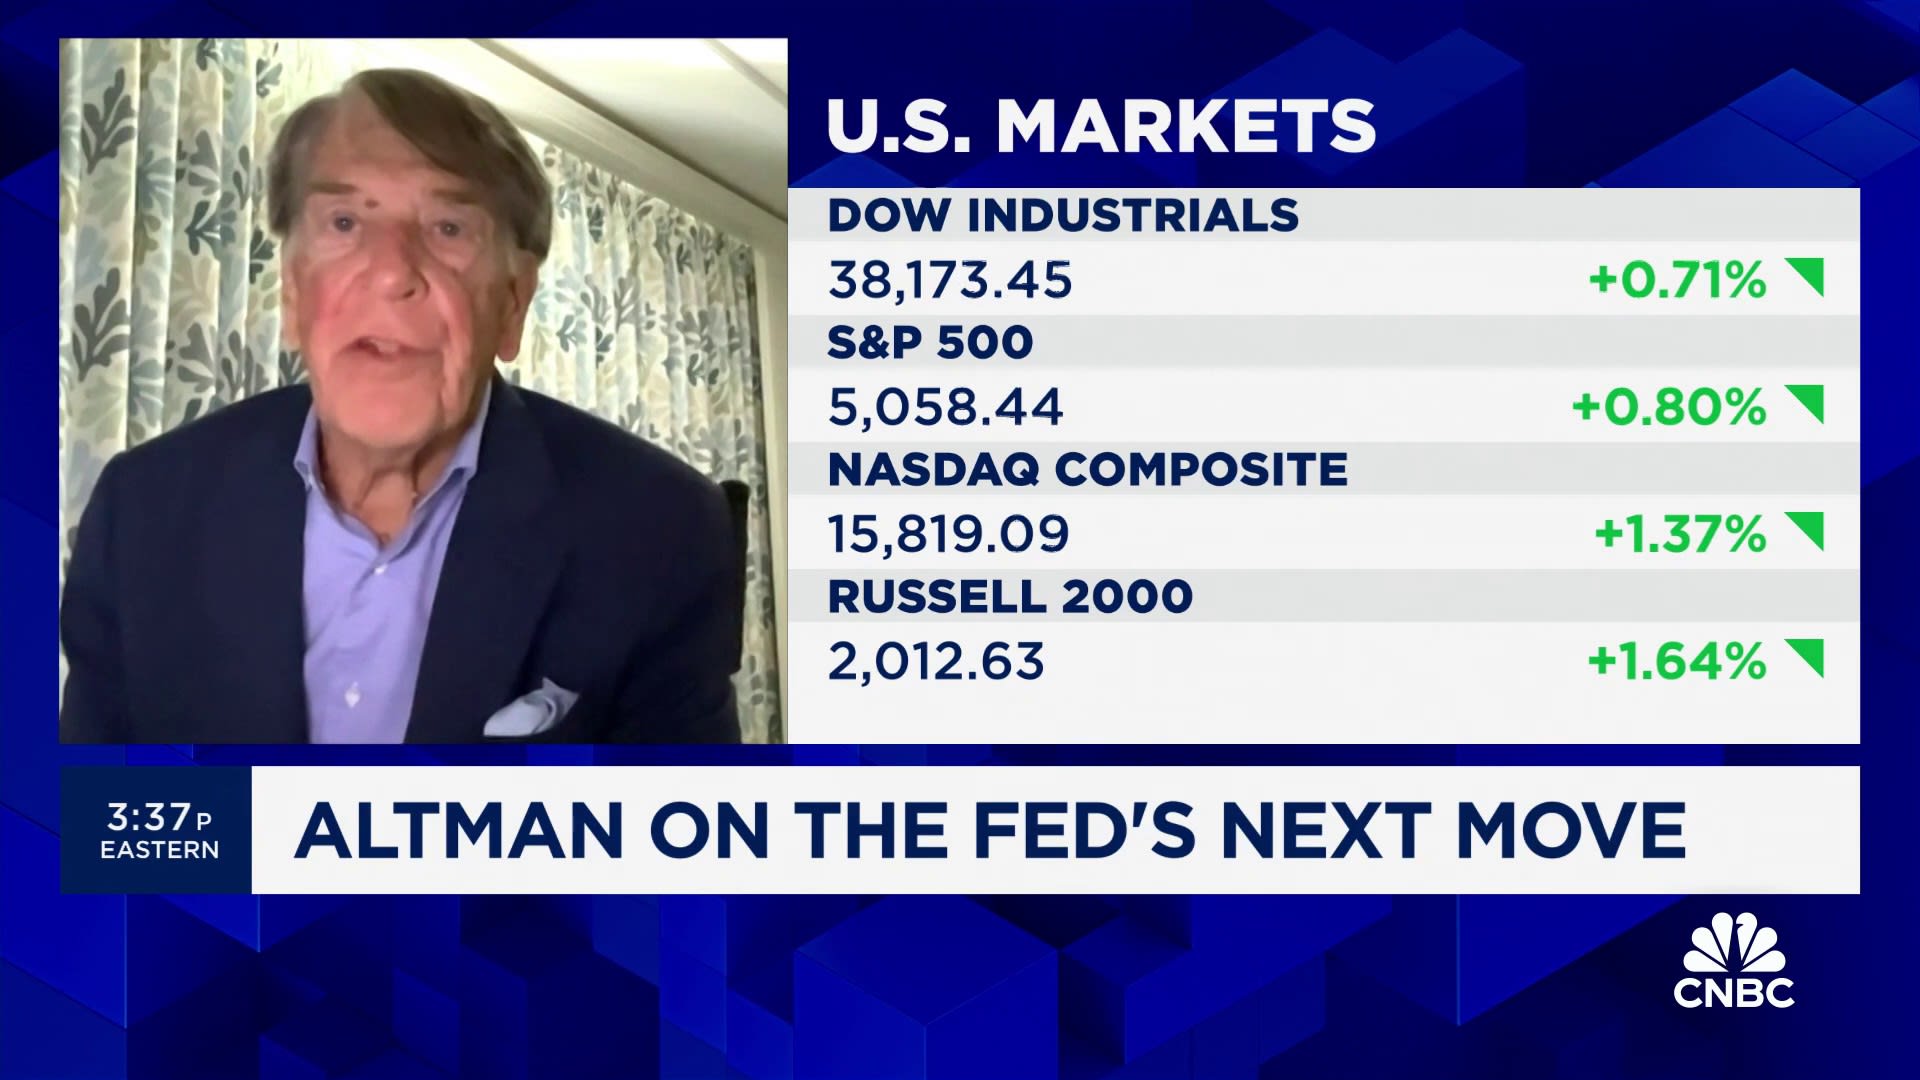 The U.S. economy is the envy of the world, says Evercore’s Roger Altman [Video]